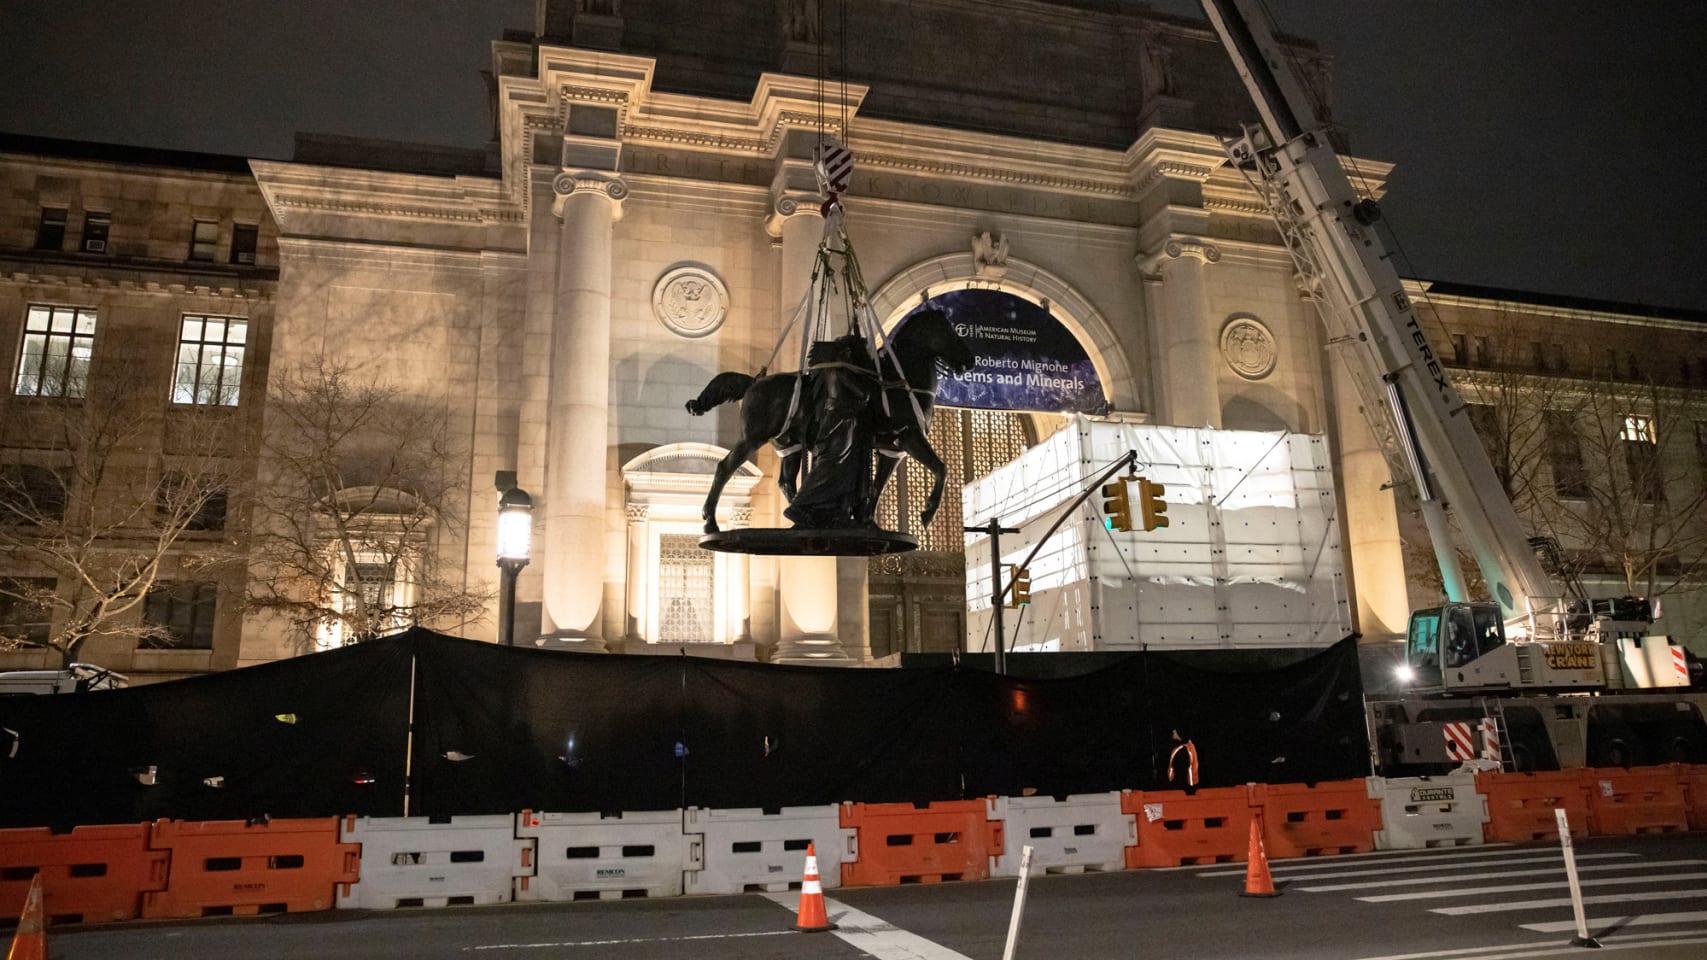 The Roosevelt statue was removed from the New York Museum after the controversy